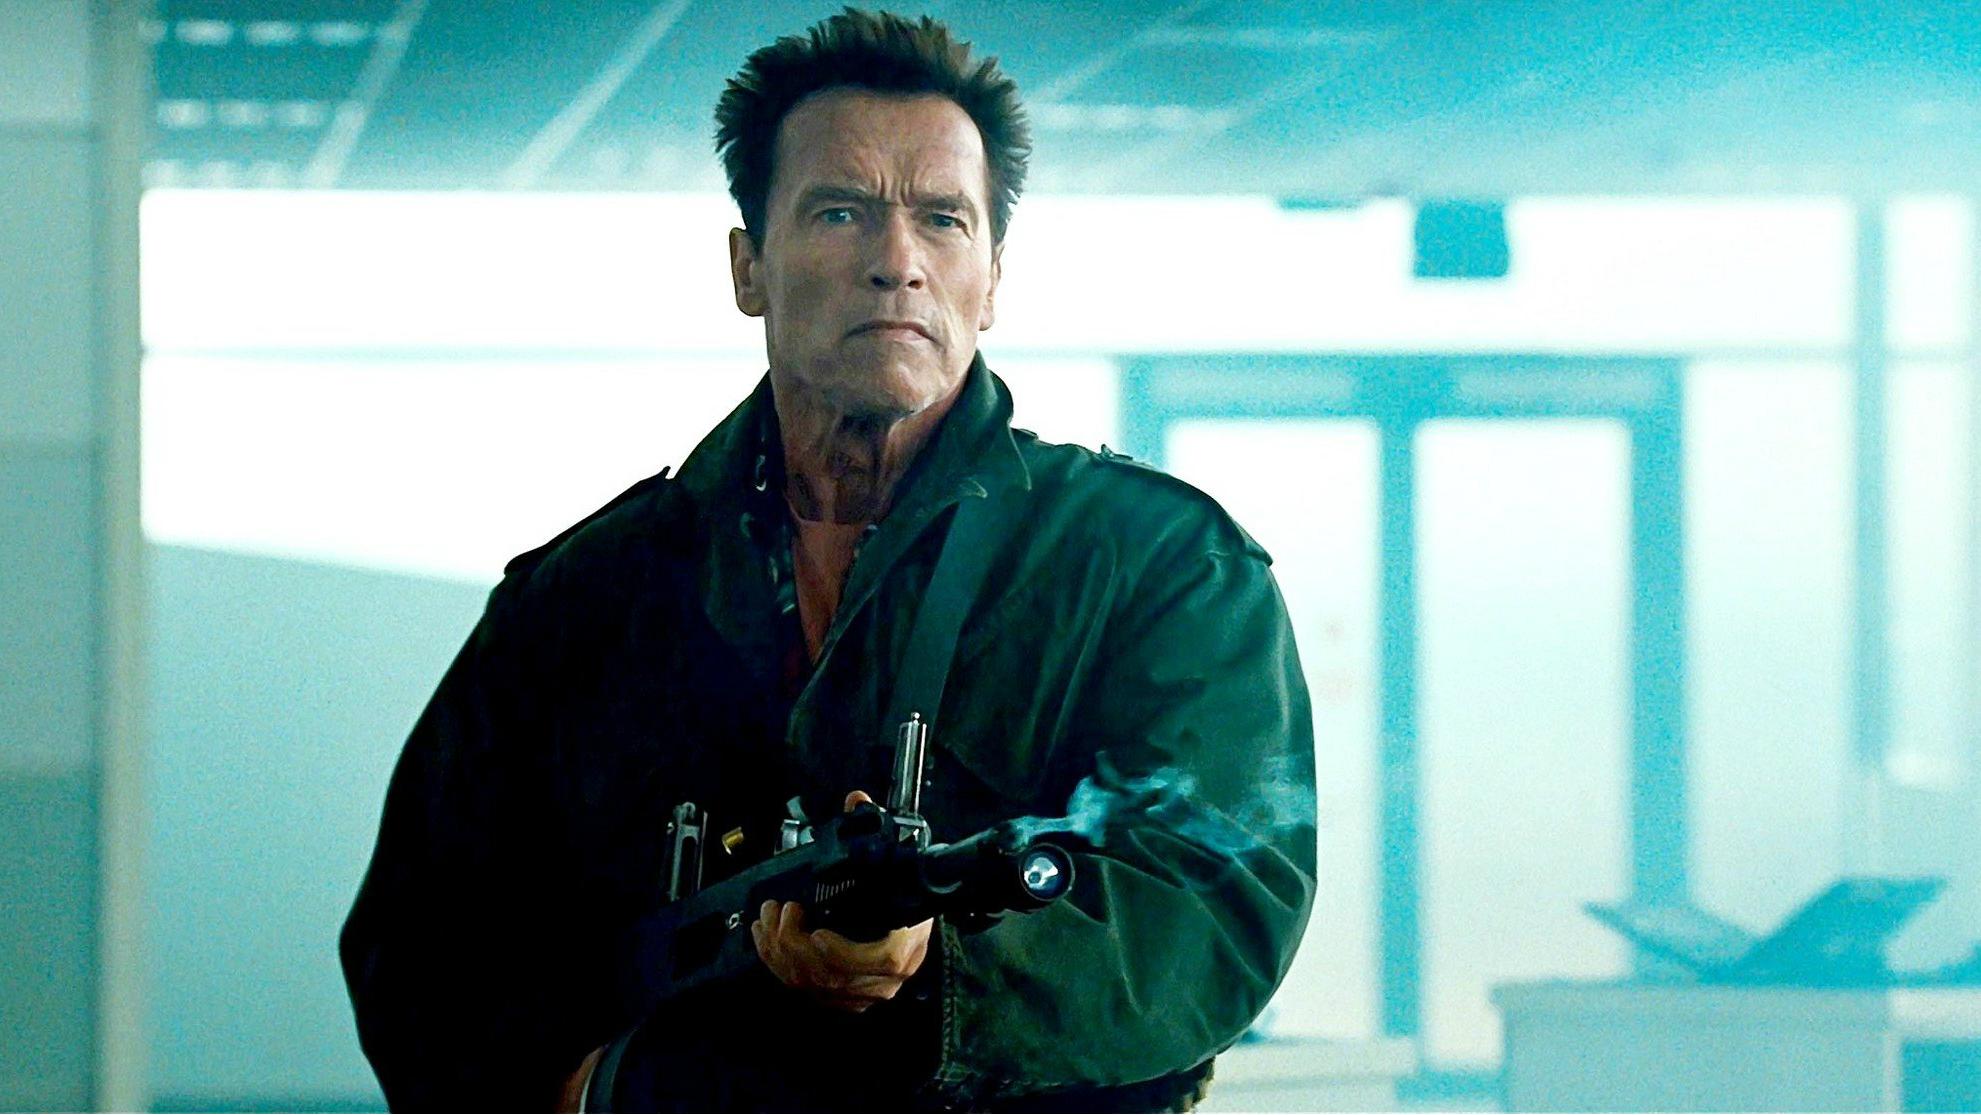 Arnold Schwarzenegger, Hollywood's most famous action icon